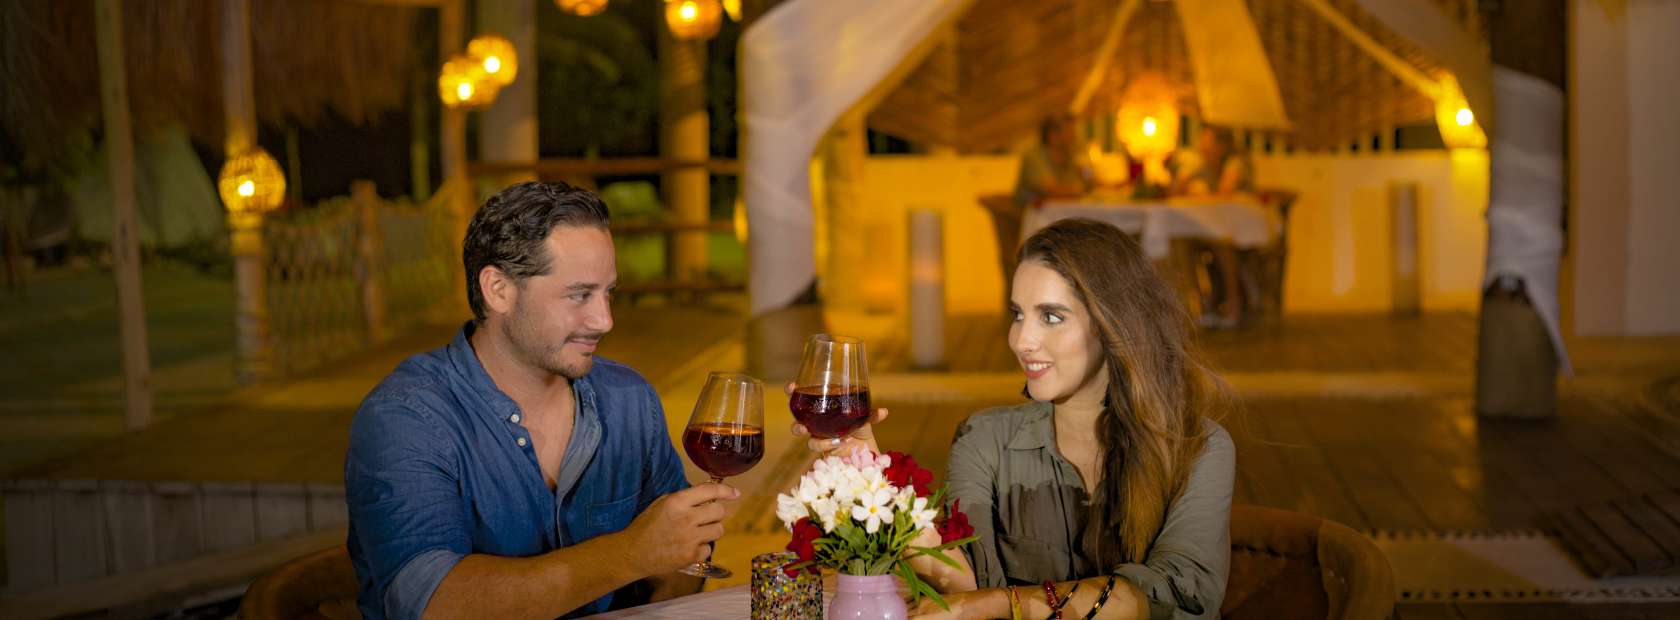 Couple Dining at Mahahual Hotel Table